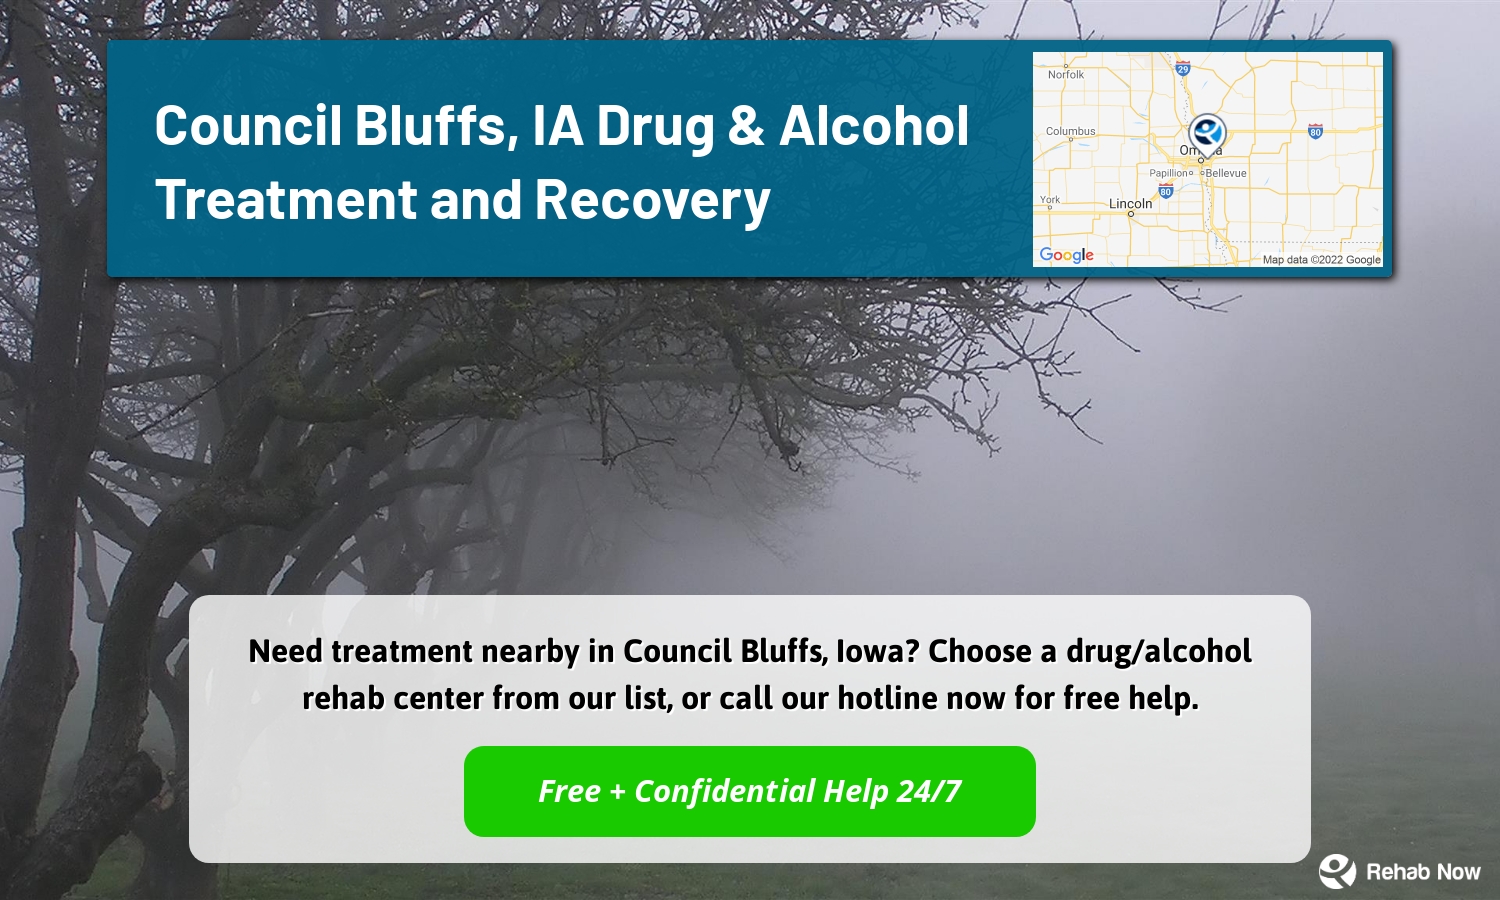 Need treatment nearby in Council Bluffs, Iowa? Choose a drug/alcohol rehab center from our list, or call our hotline now for free help.